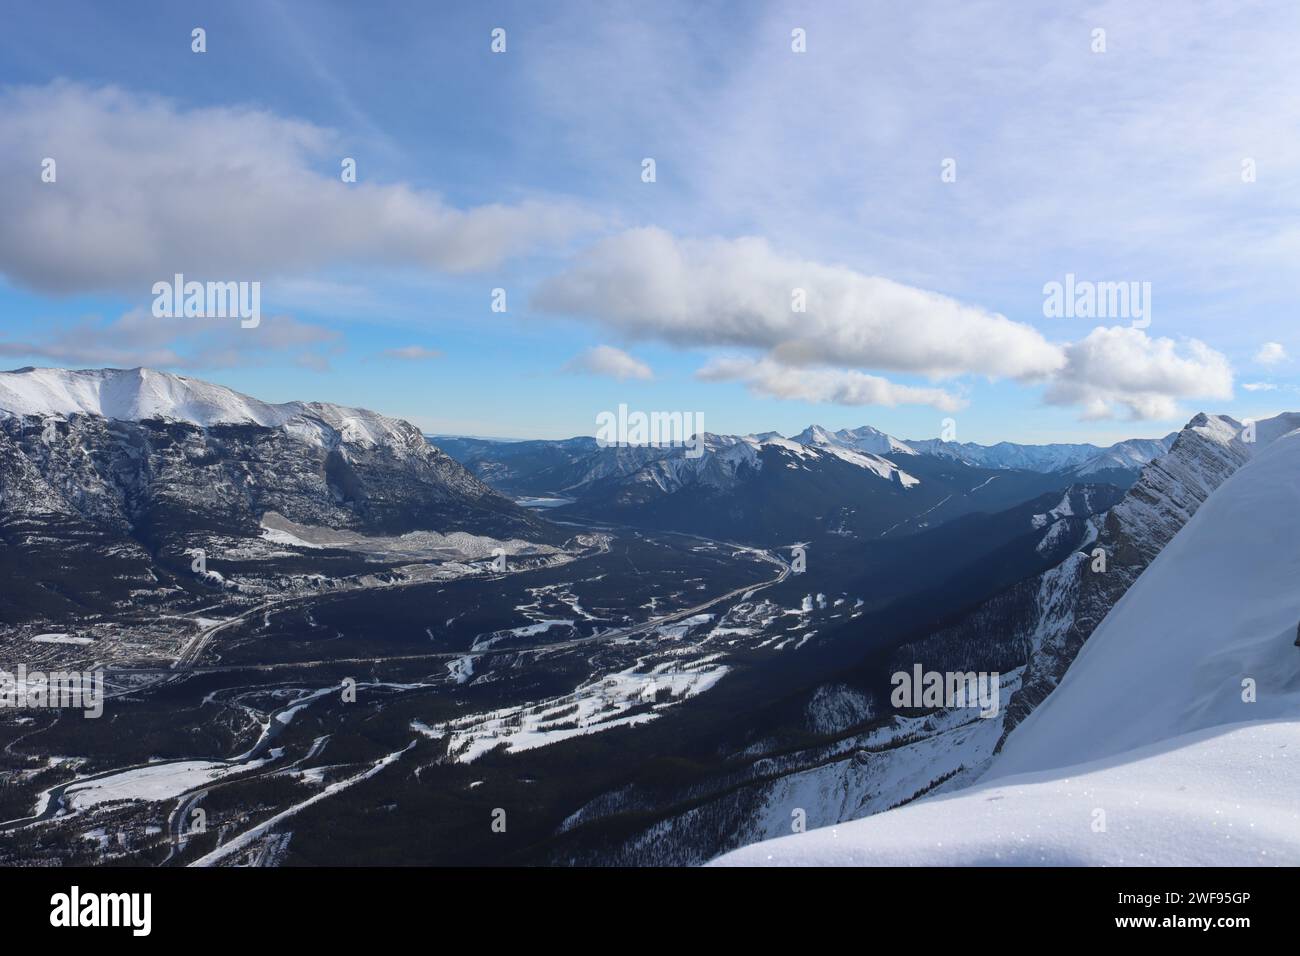 A breathtaking aerial shot of snow-capped mountains, taken from the summit, showcasing the stunning vista Stock Photo